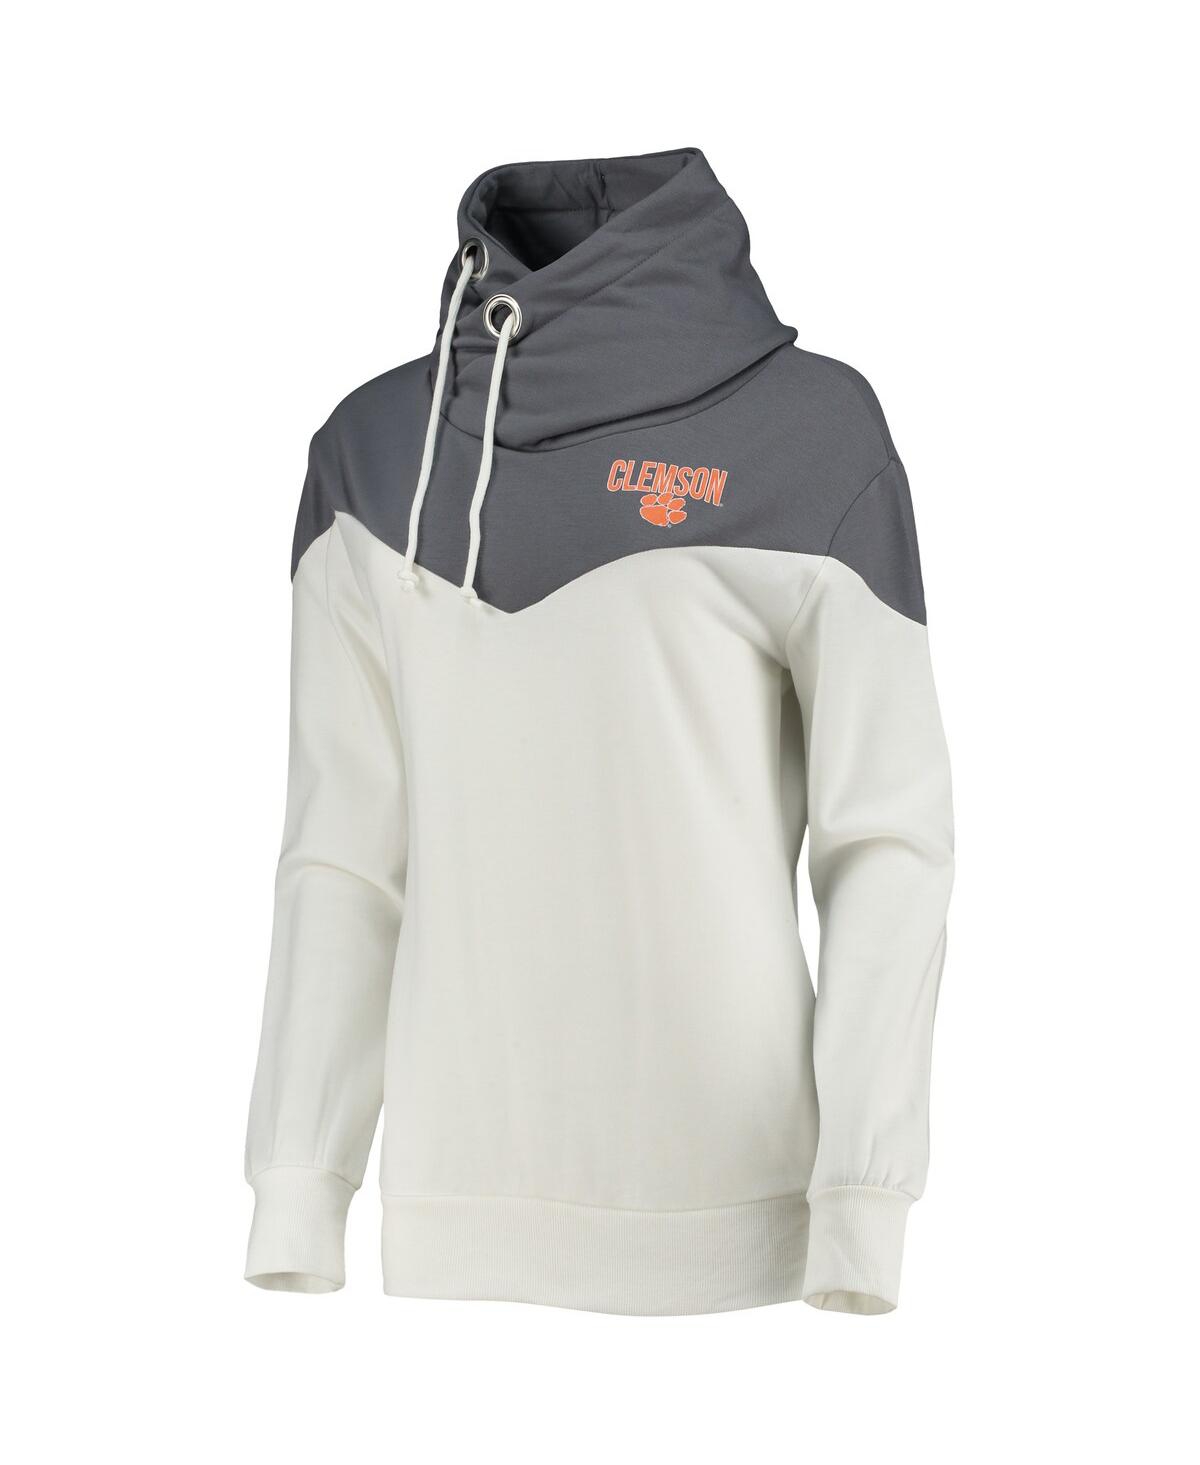 Shop Gameday Couture Women's  White, Gray Clemson Tigers Old School Arrow Blocked Cowl Neck Tri-blend Pull In White,gray